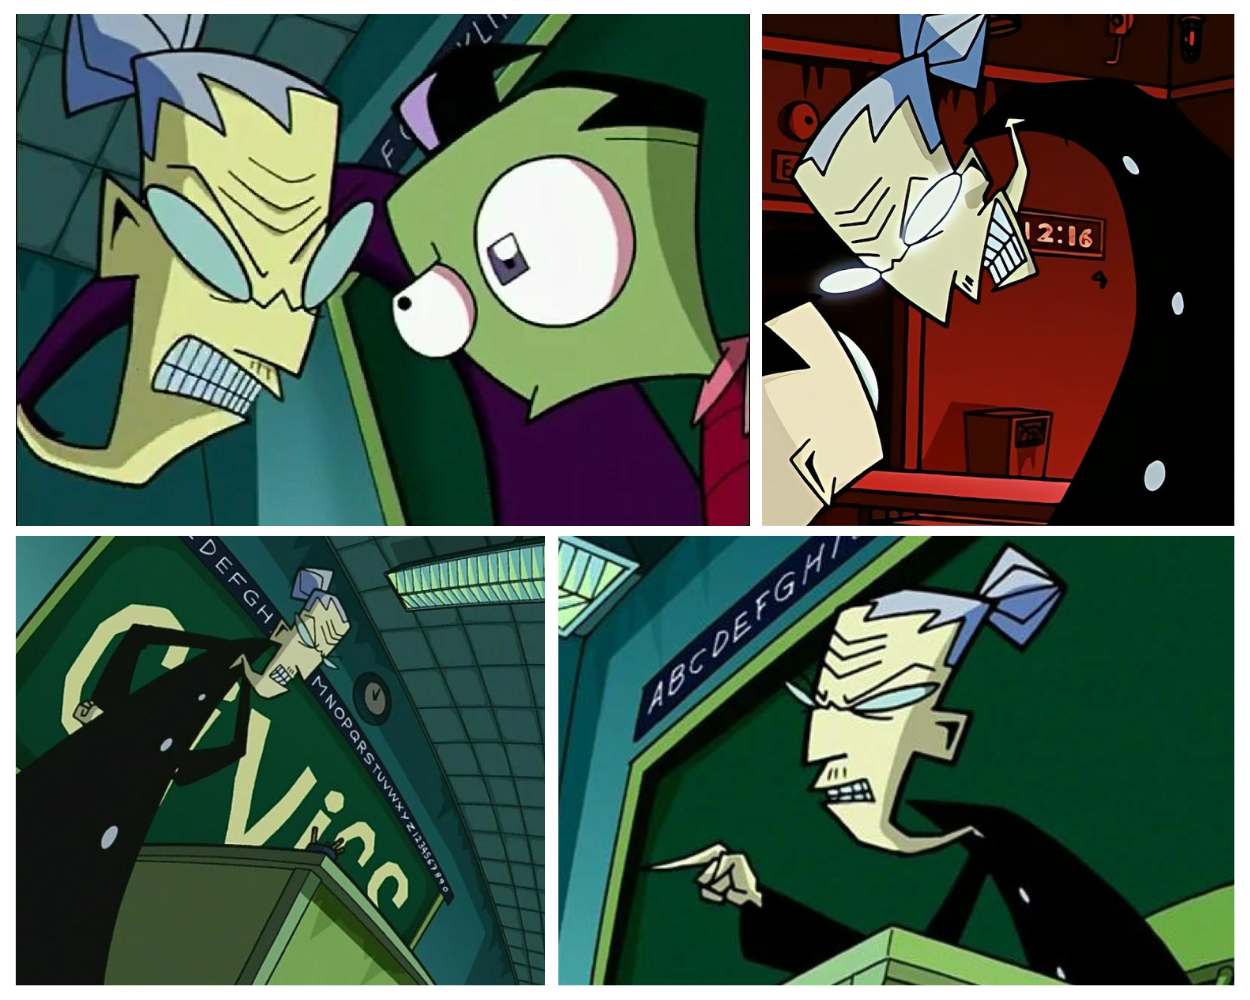 Miss Bitters from invader zim